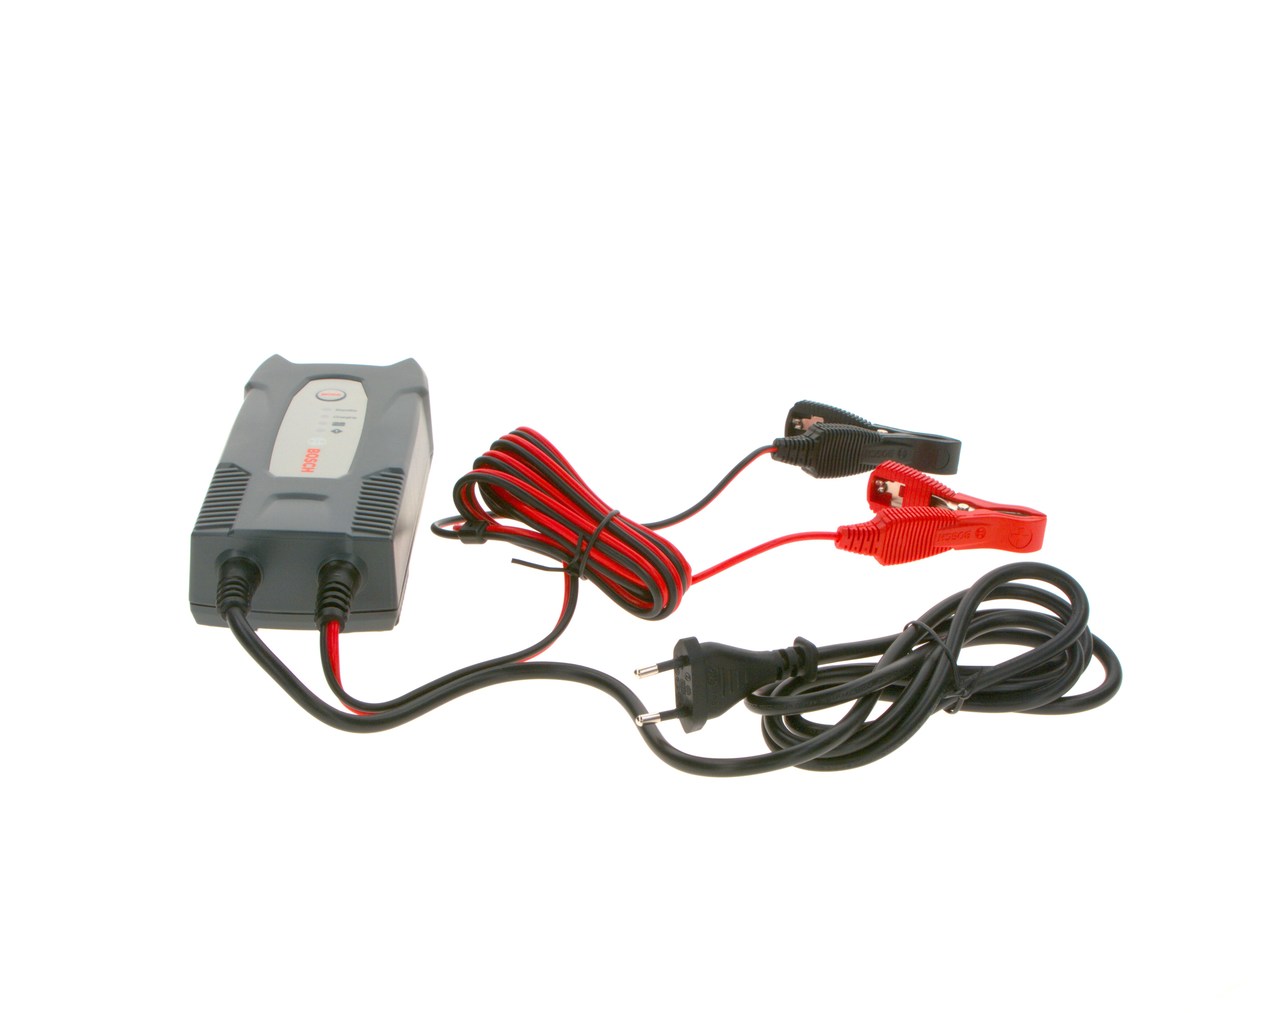 Battery chargers Battery charger, charging current 10A, charging voltage 12V, power source voltage 230v  Art. 018999901M